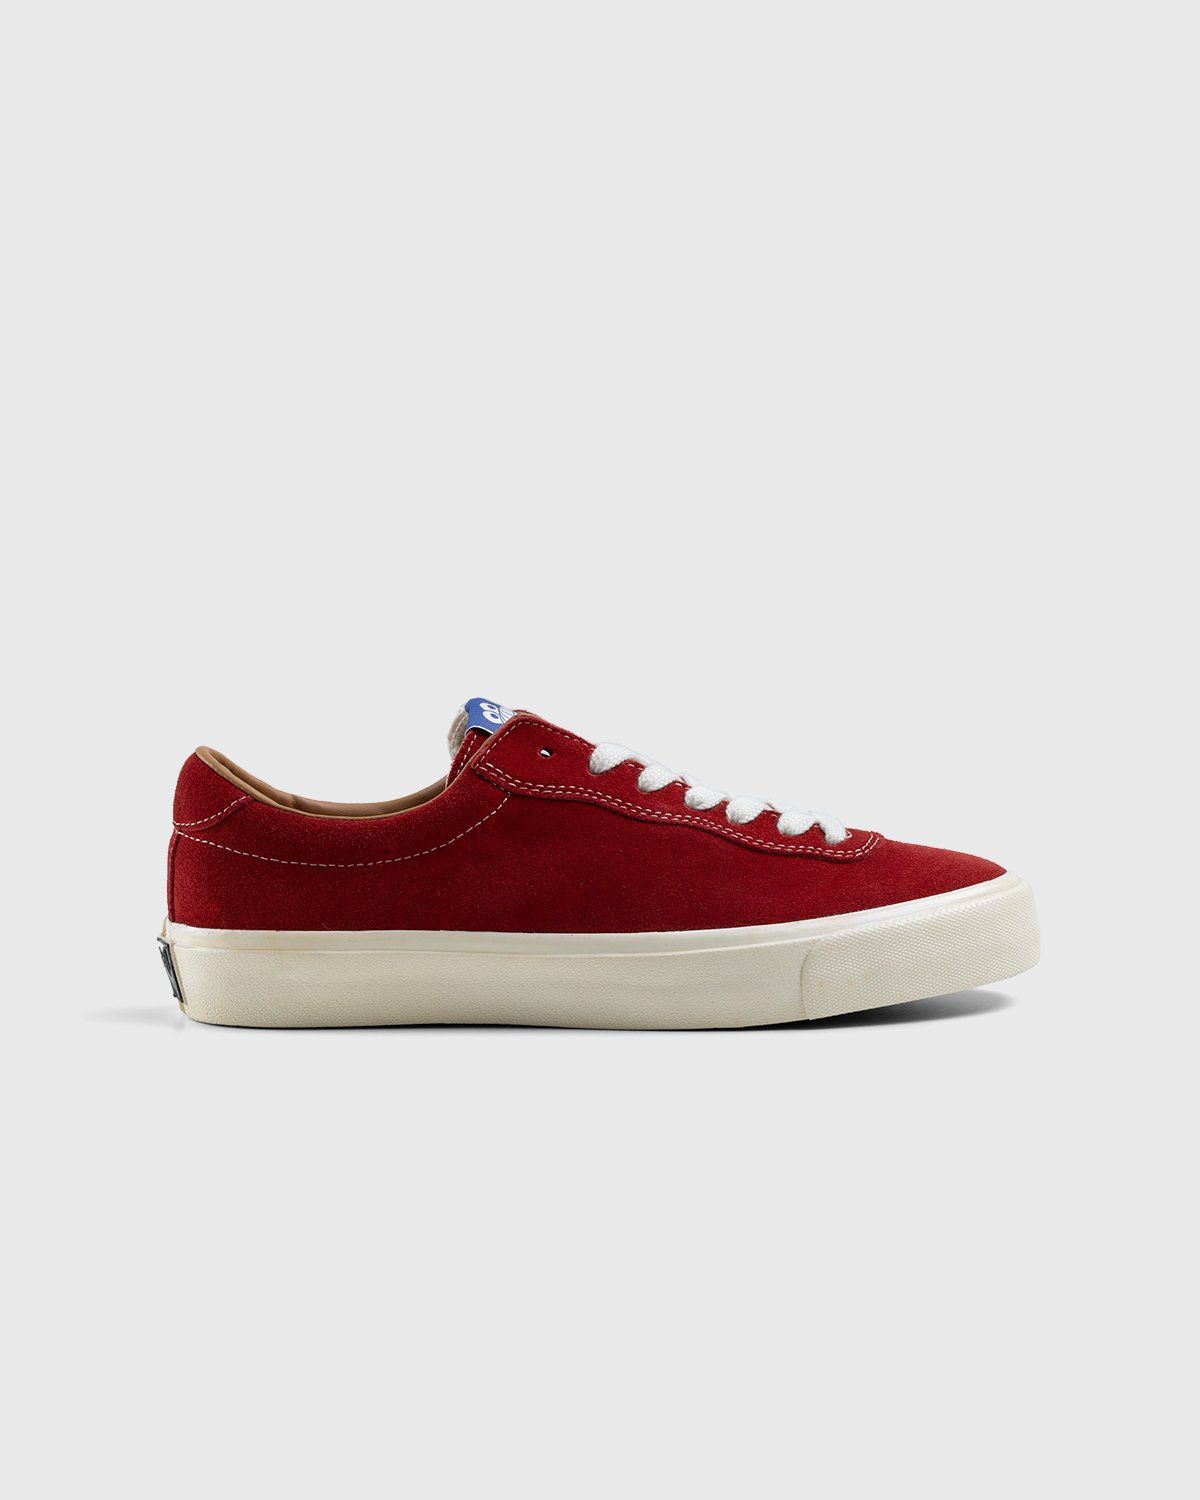 Last Resort AB – VM001 Lo Suede Old Red/White - Image 1